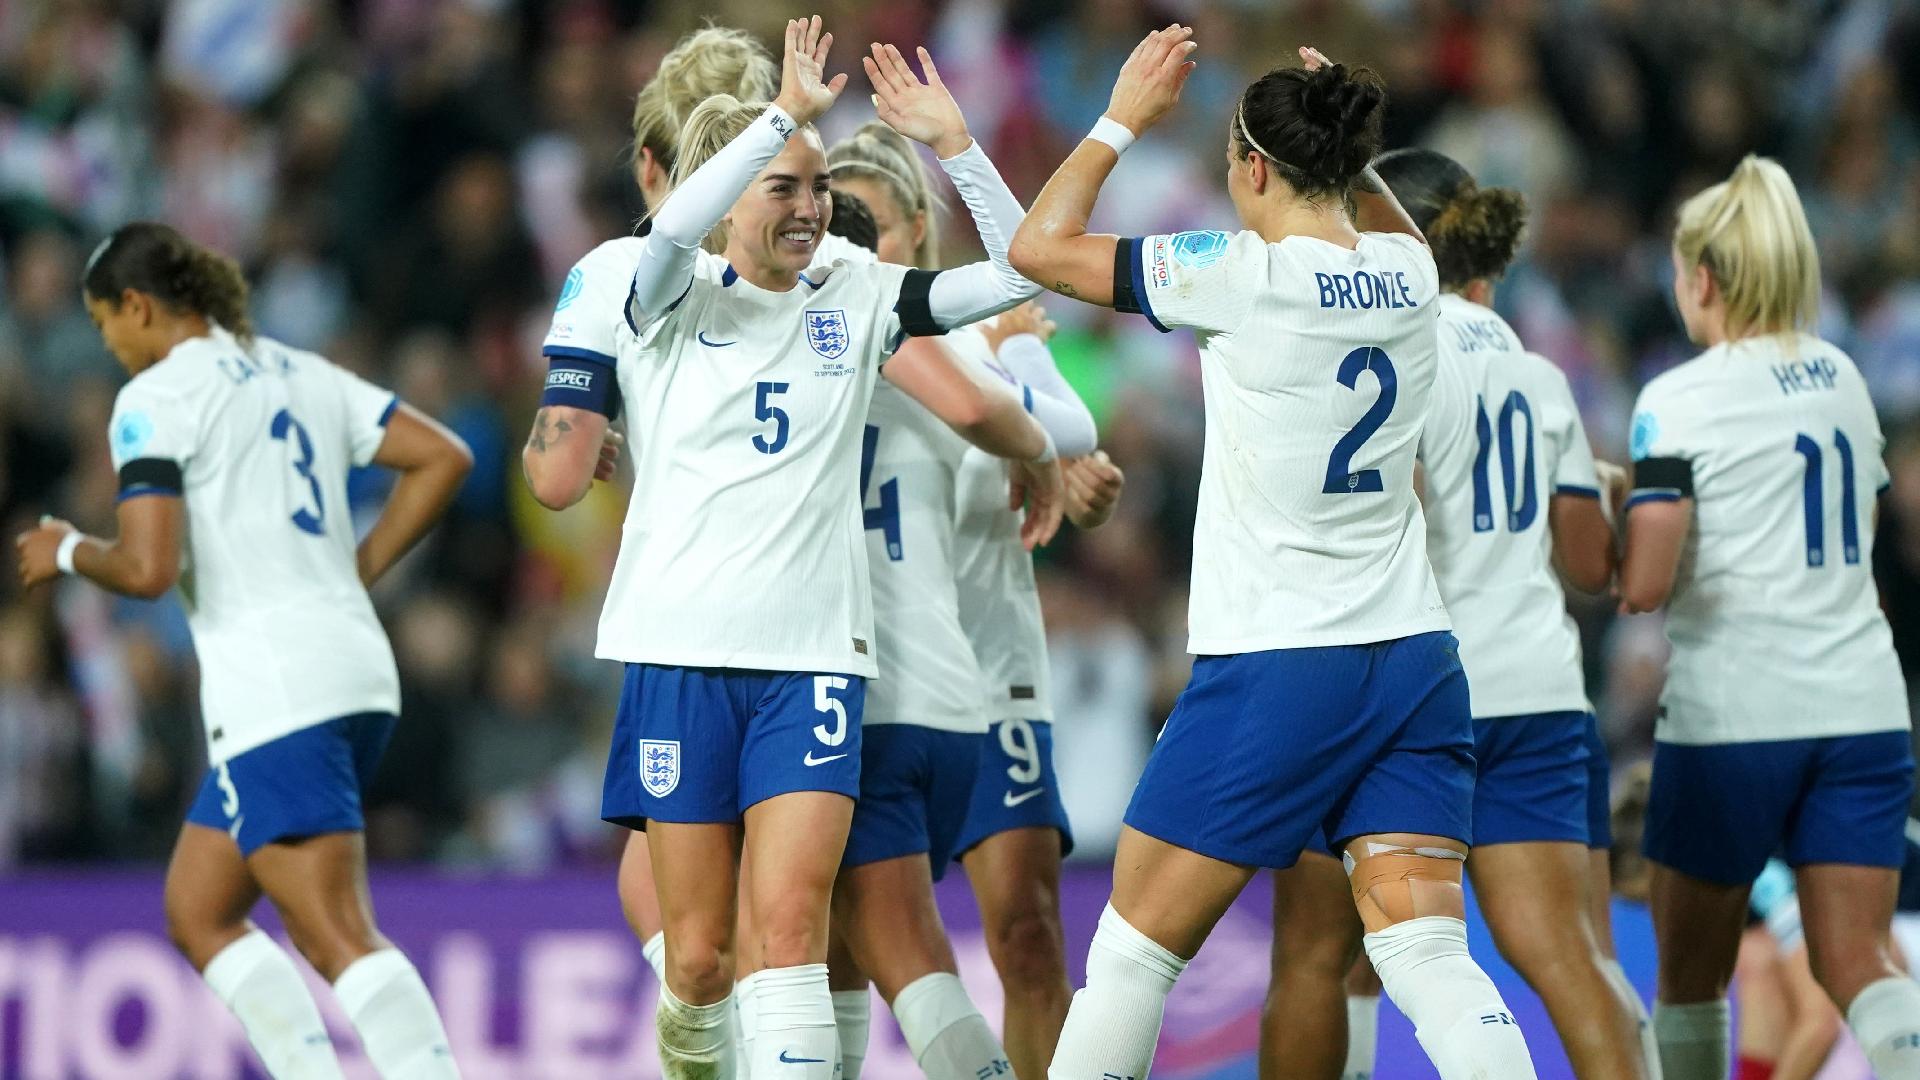 Scotland goal came from World Cup routine – Lucy Bronze